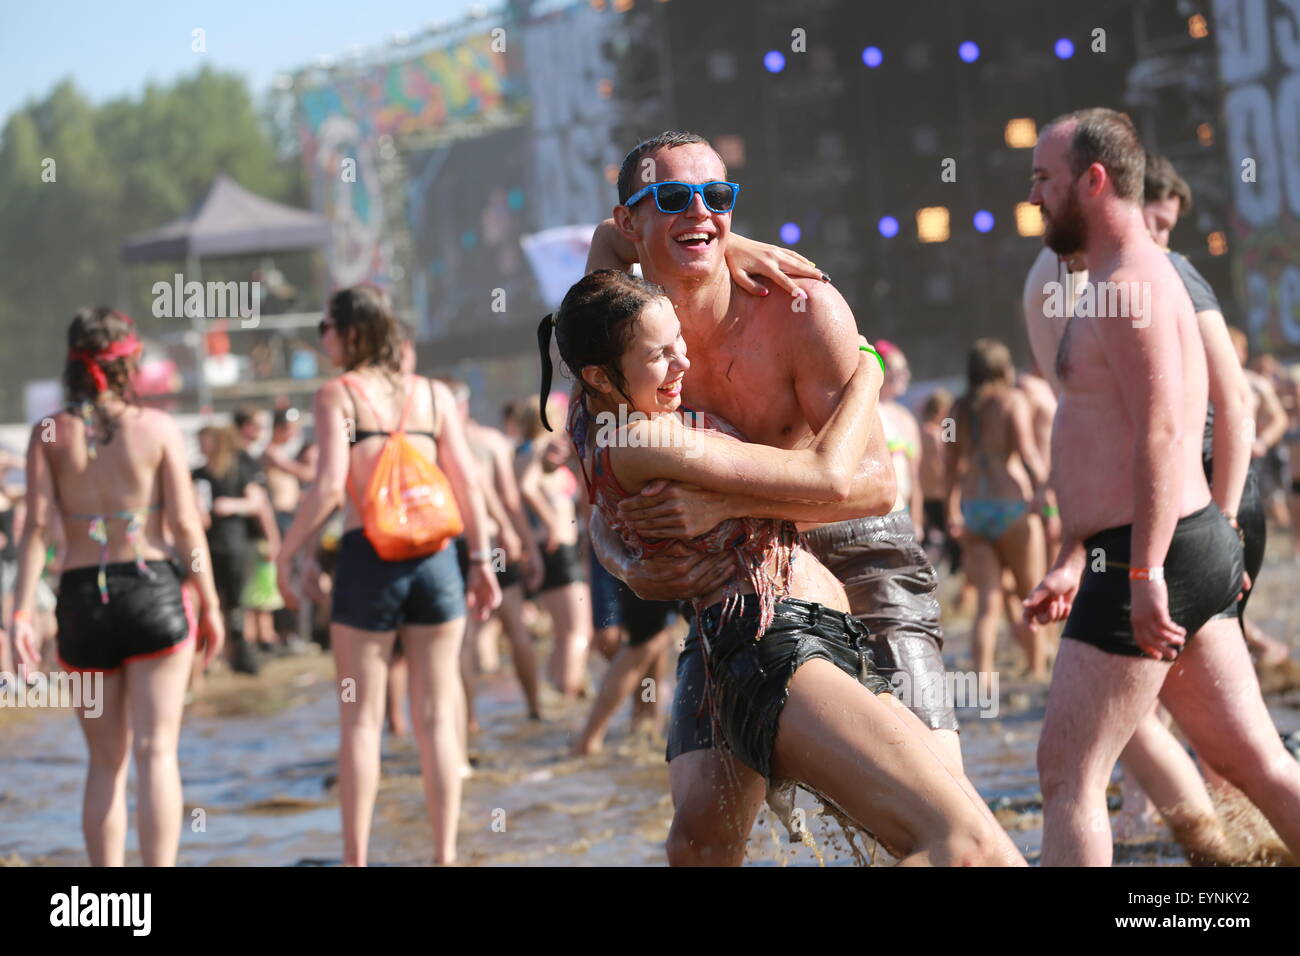 Küstrin an der Oder, Poland. 01st Aug, 2015. A reveler enjoys the mud fights at the Przystanek Woodstock Festival 2015 held in Küstrin. Hundreds of thousands of attendees enjoy one of Europe's largest non-commercial open-air events, the Woodstock Stop Festival Open Air music festival in Kostrzyn. Credit:  Simone Kuhlmey/Pacific Press/Alamy Live News Stock Photo